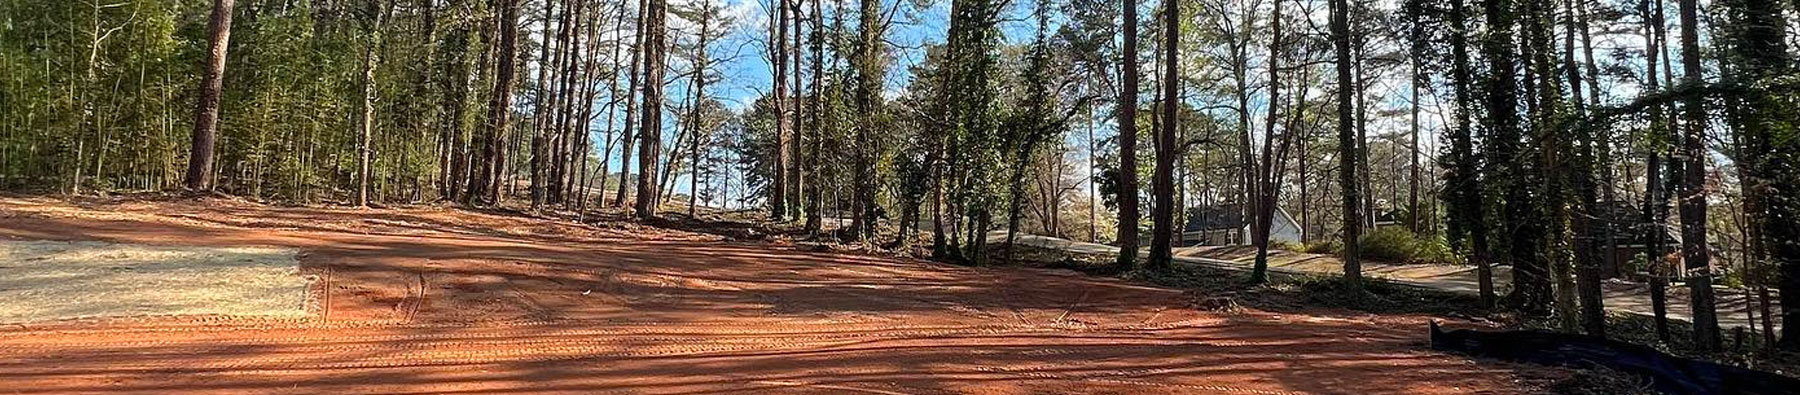 Land Clearing | Grading | Forestry Mulching | Trucking Services